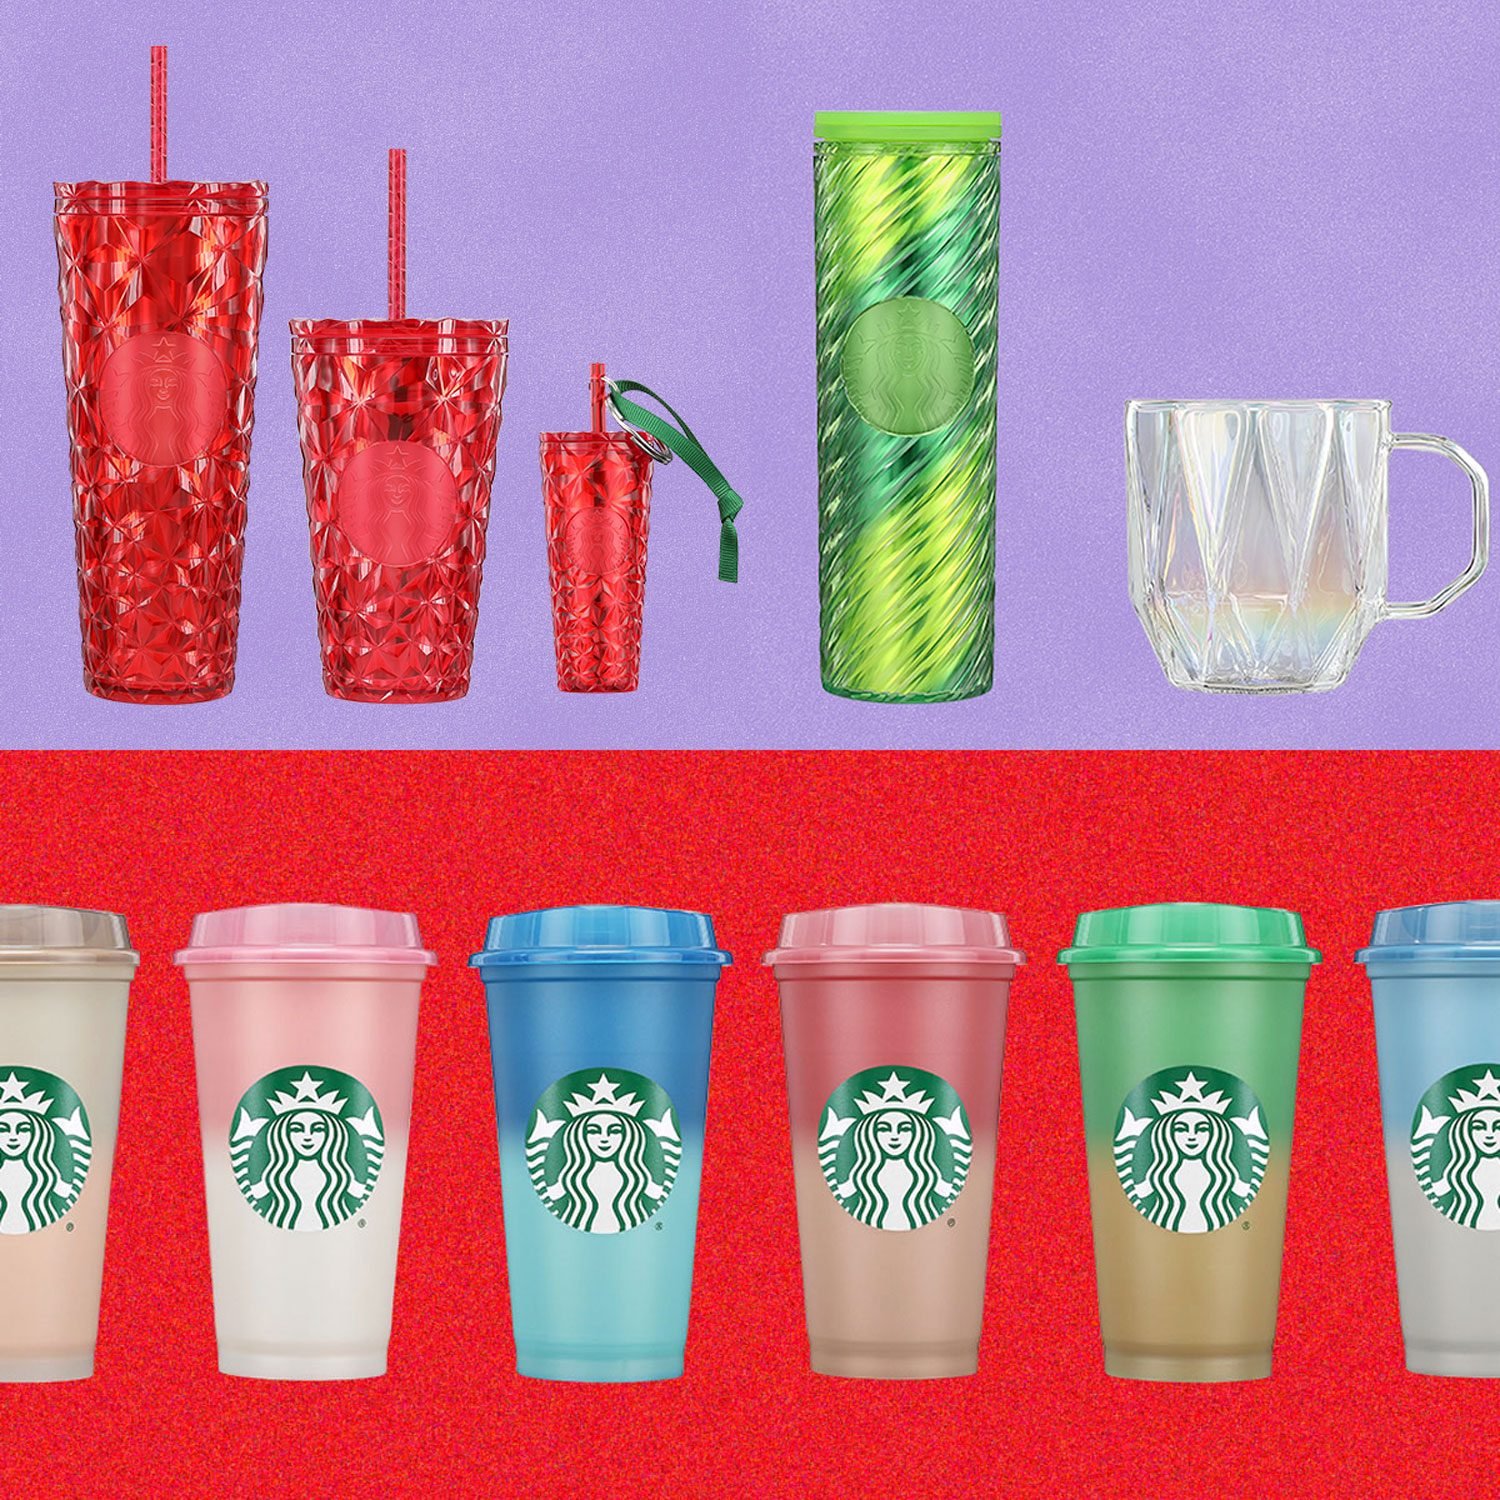 https://www.tasteofhome.com/wp-content/uploads/2023/10/Starbucks-Holiday-Cup-Lineup-Courtesy-Starbucks-3-DH-TOH.jpg?fit=700%2C1024